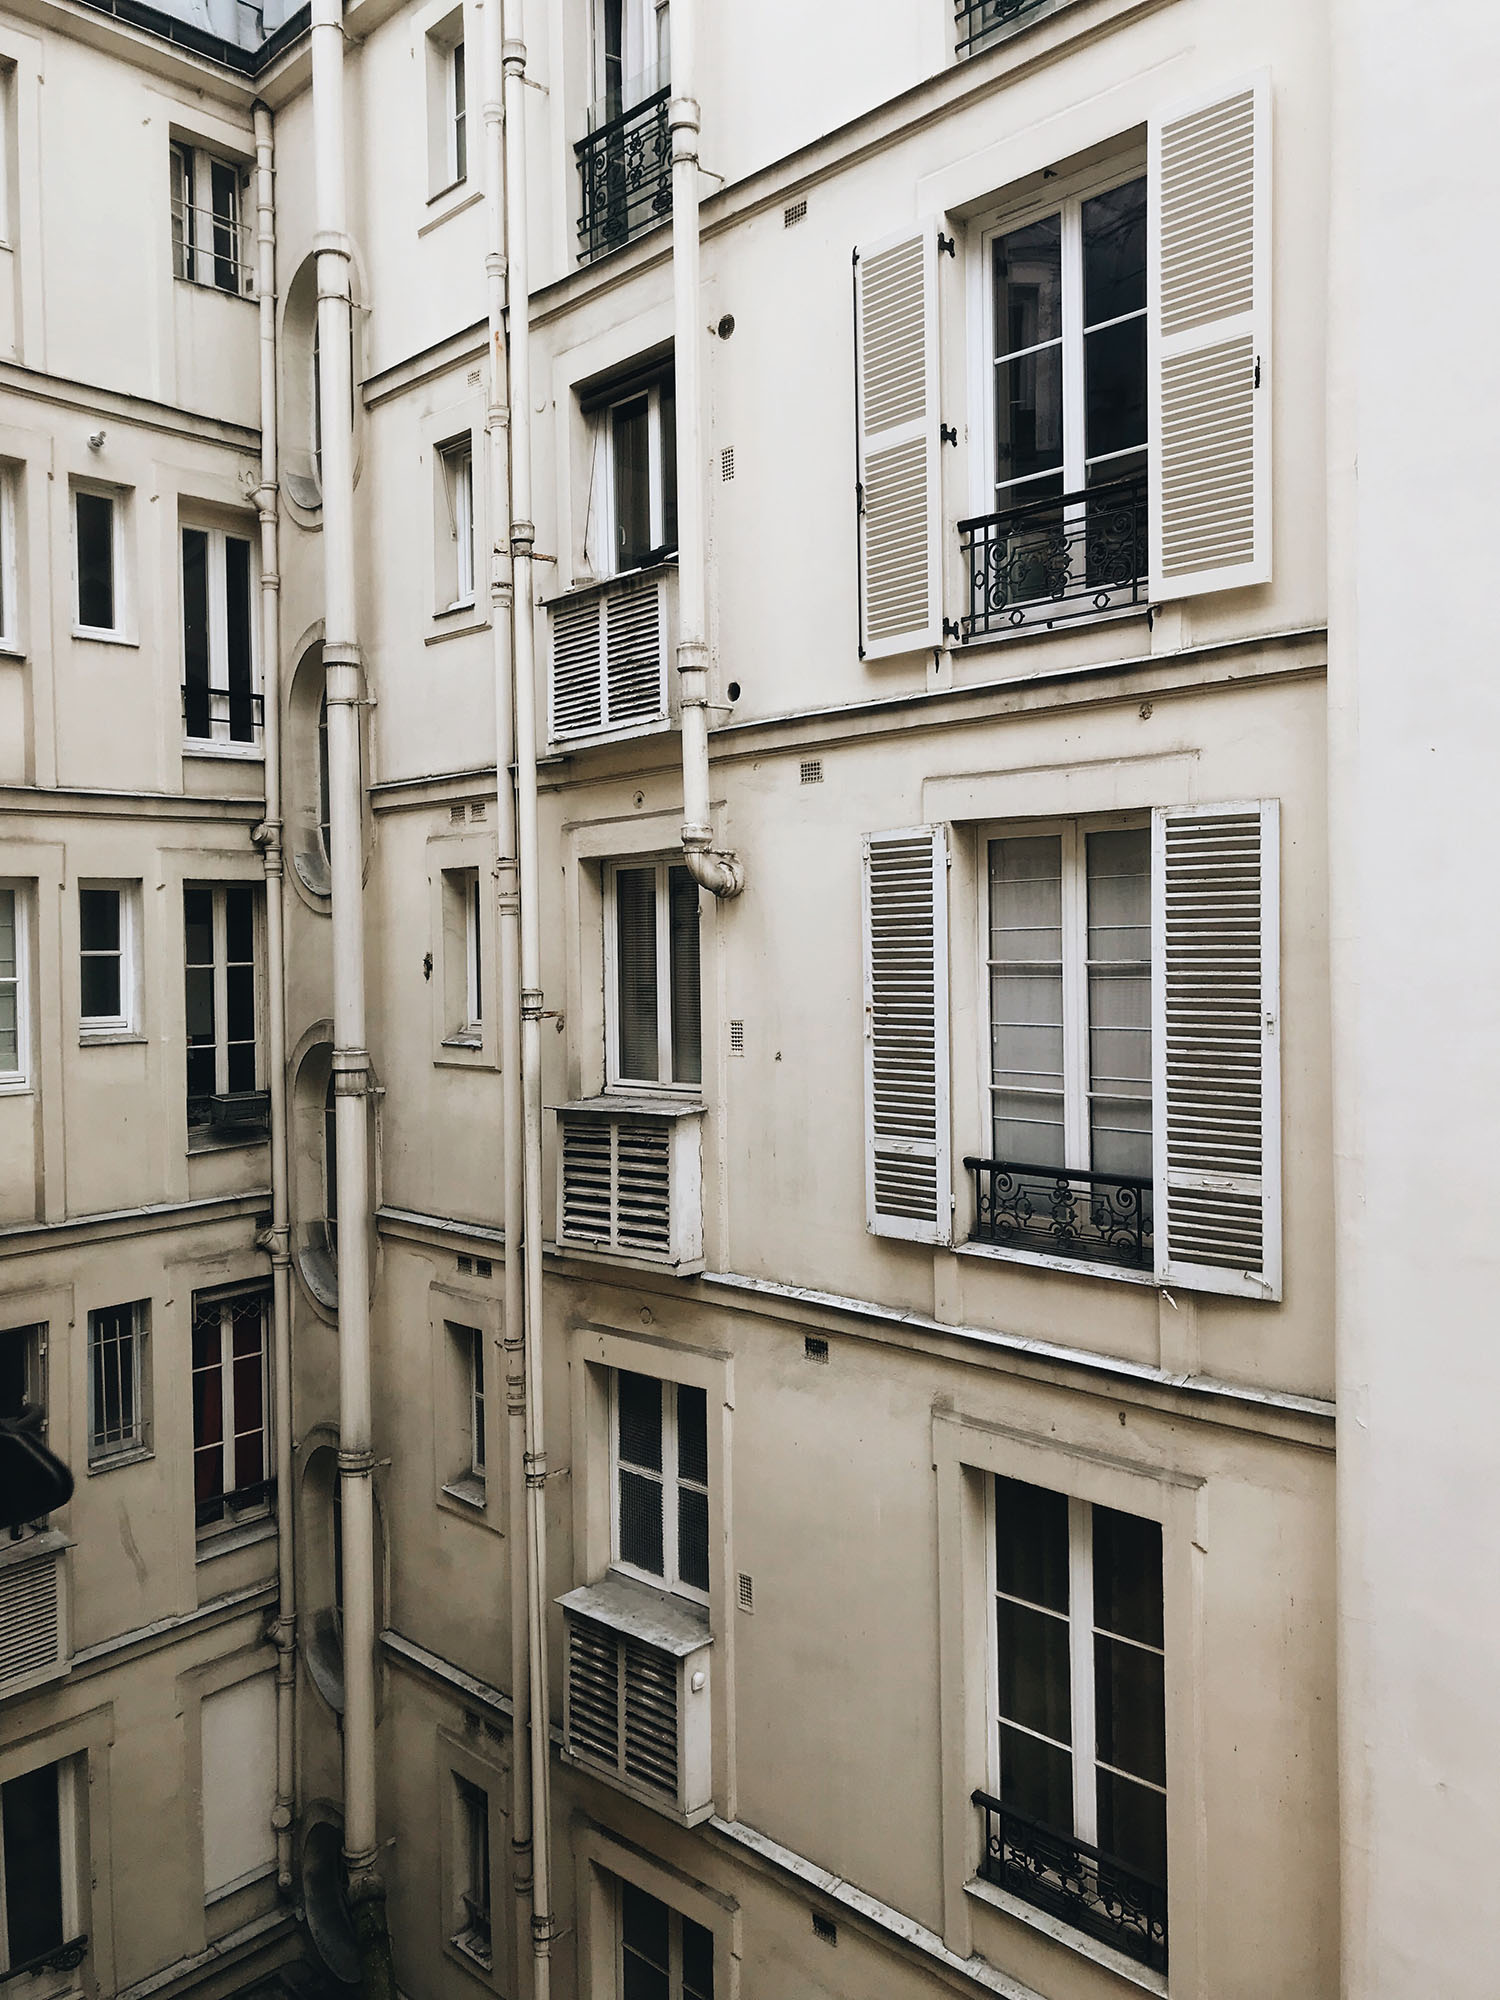 The interior courtyard of a Parisian apartment block, as captured by top Canadian travel blogger Cee Fardoe of Coco & Vera